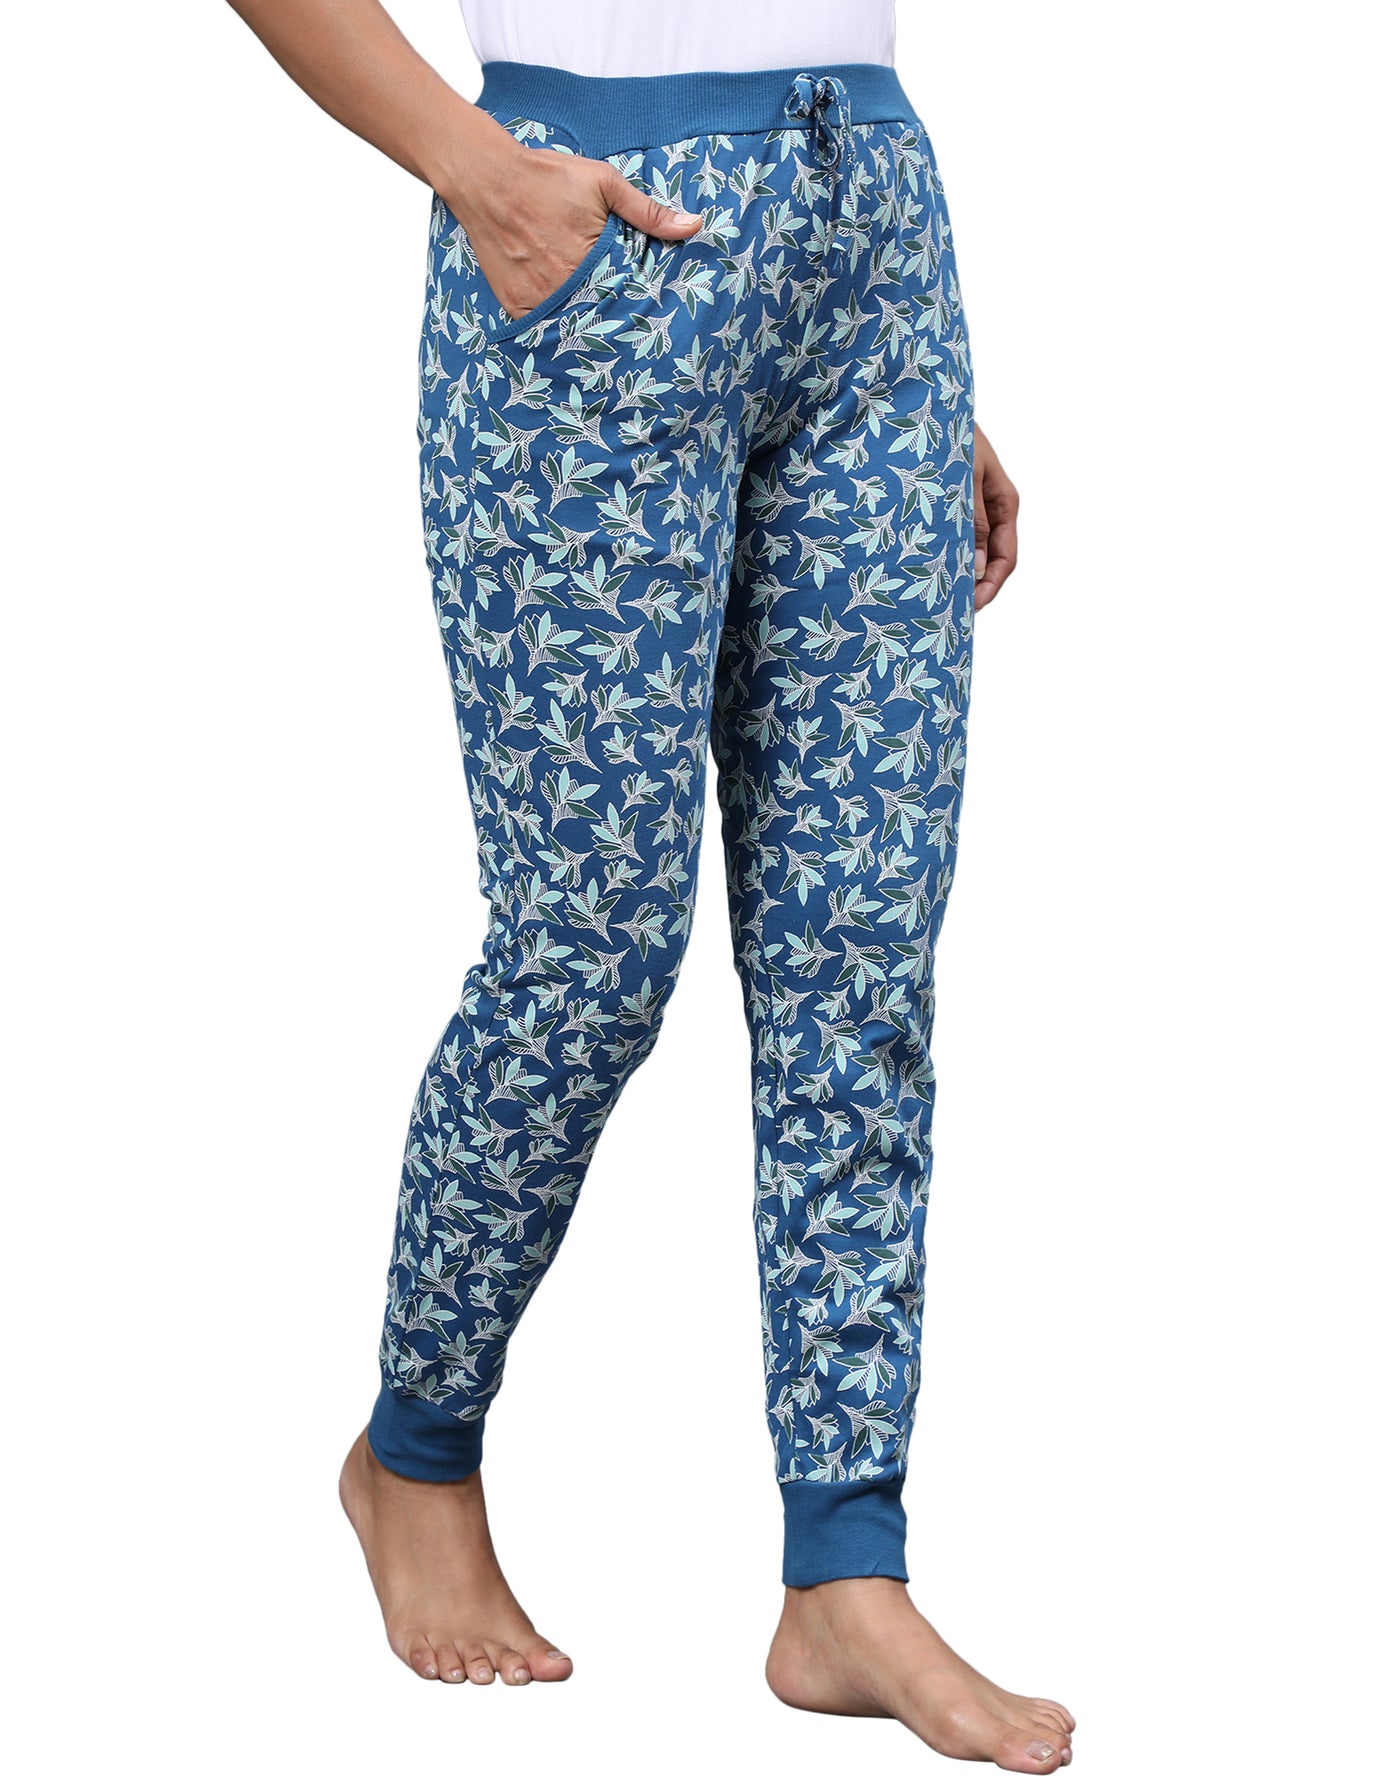 Lounge Pant for Women-Blue Floral